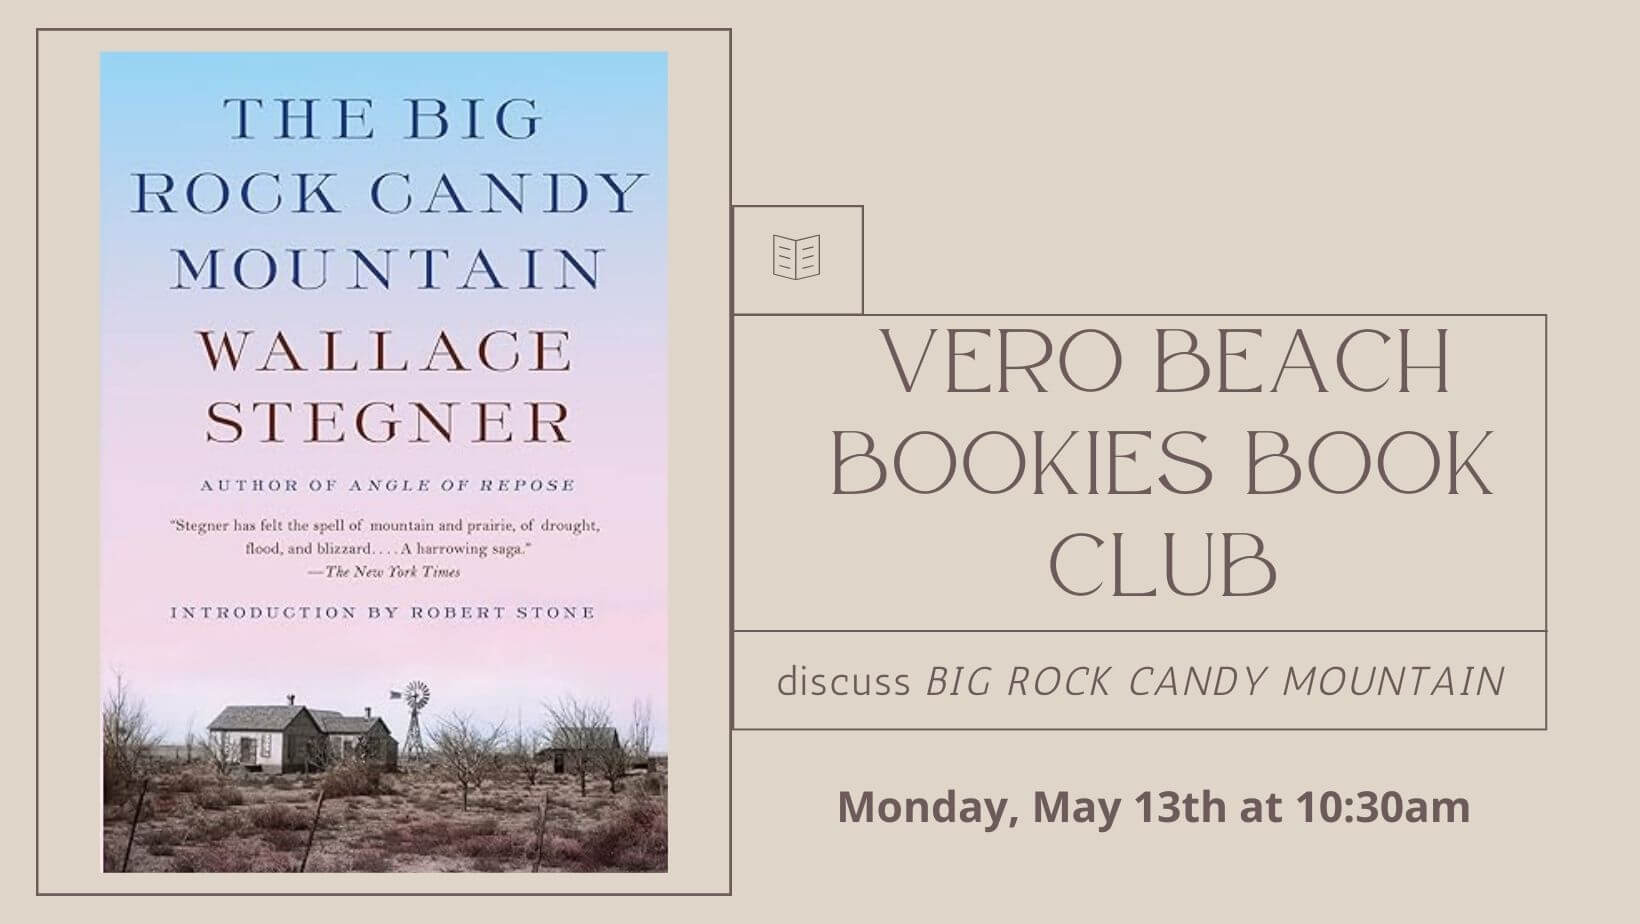 Vero Beach Book Club discusses Big Rock Candy Mountain by Wallace Stegner